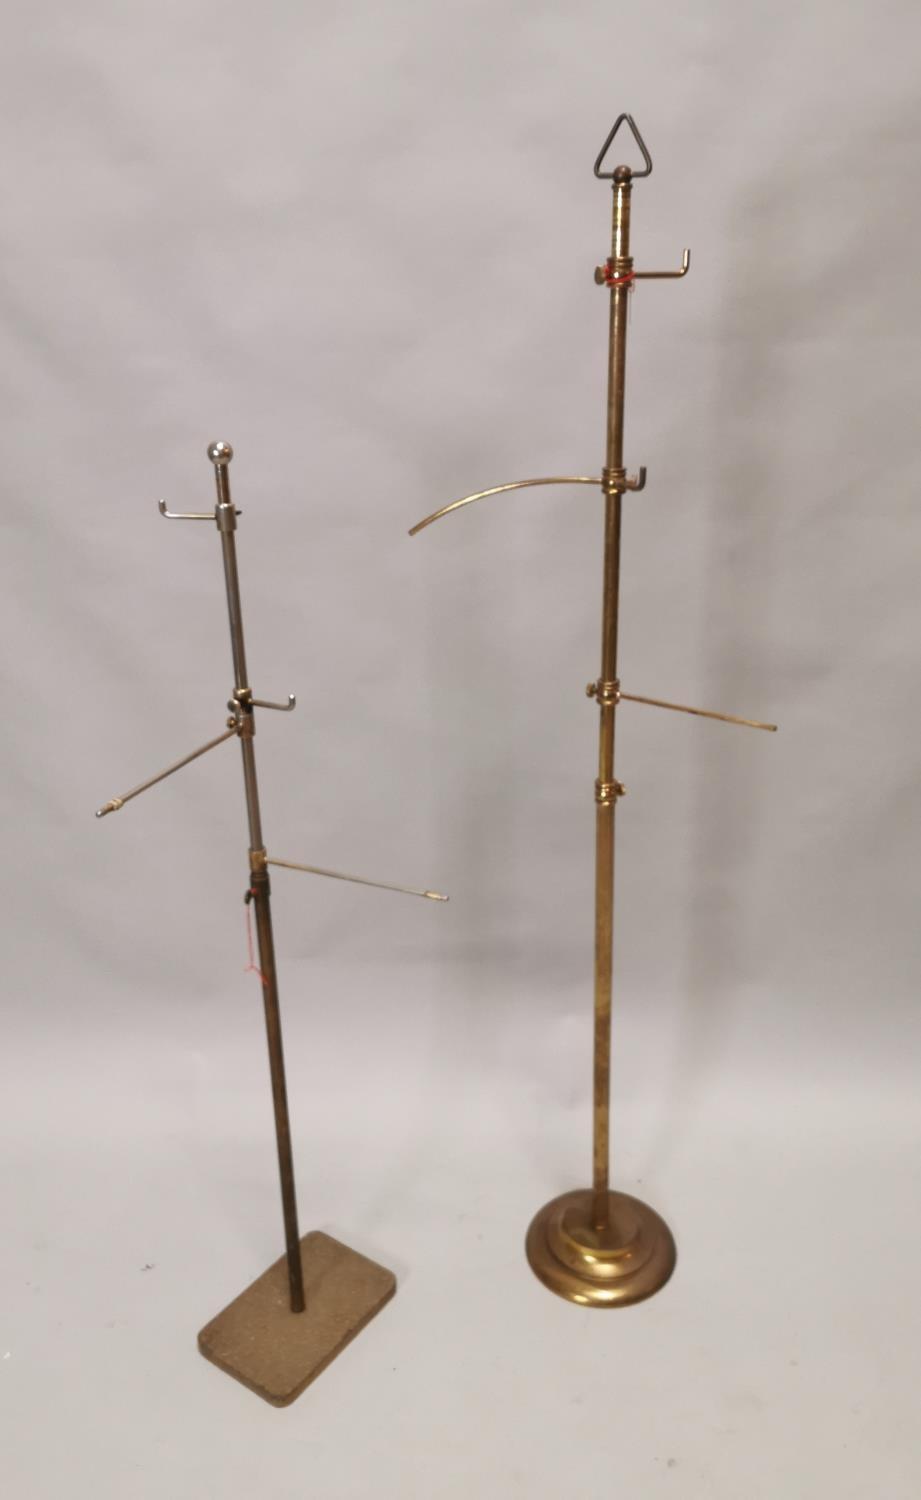 Two early 20th C. brass haberdashery shop hat stands - Image 2 of 8